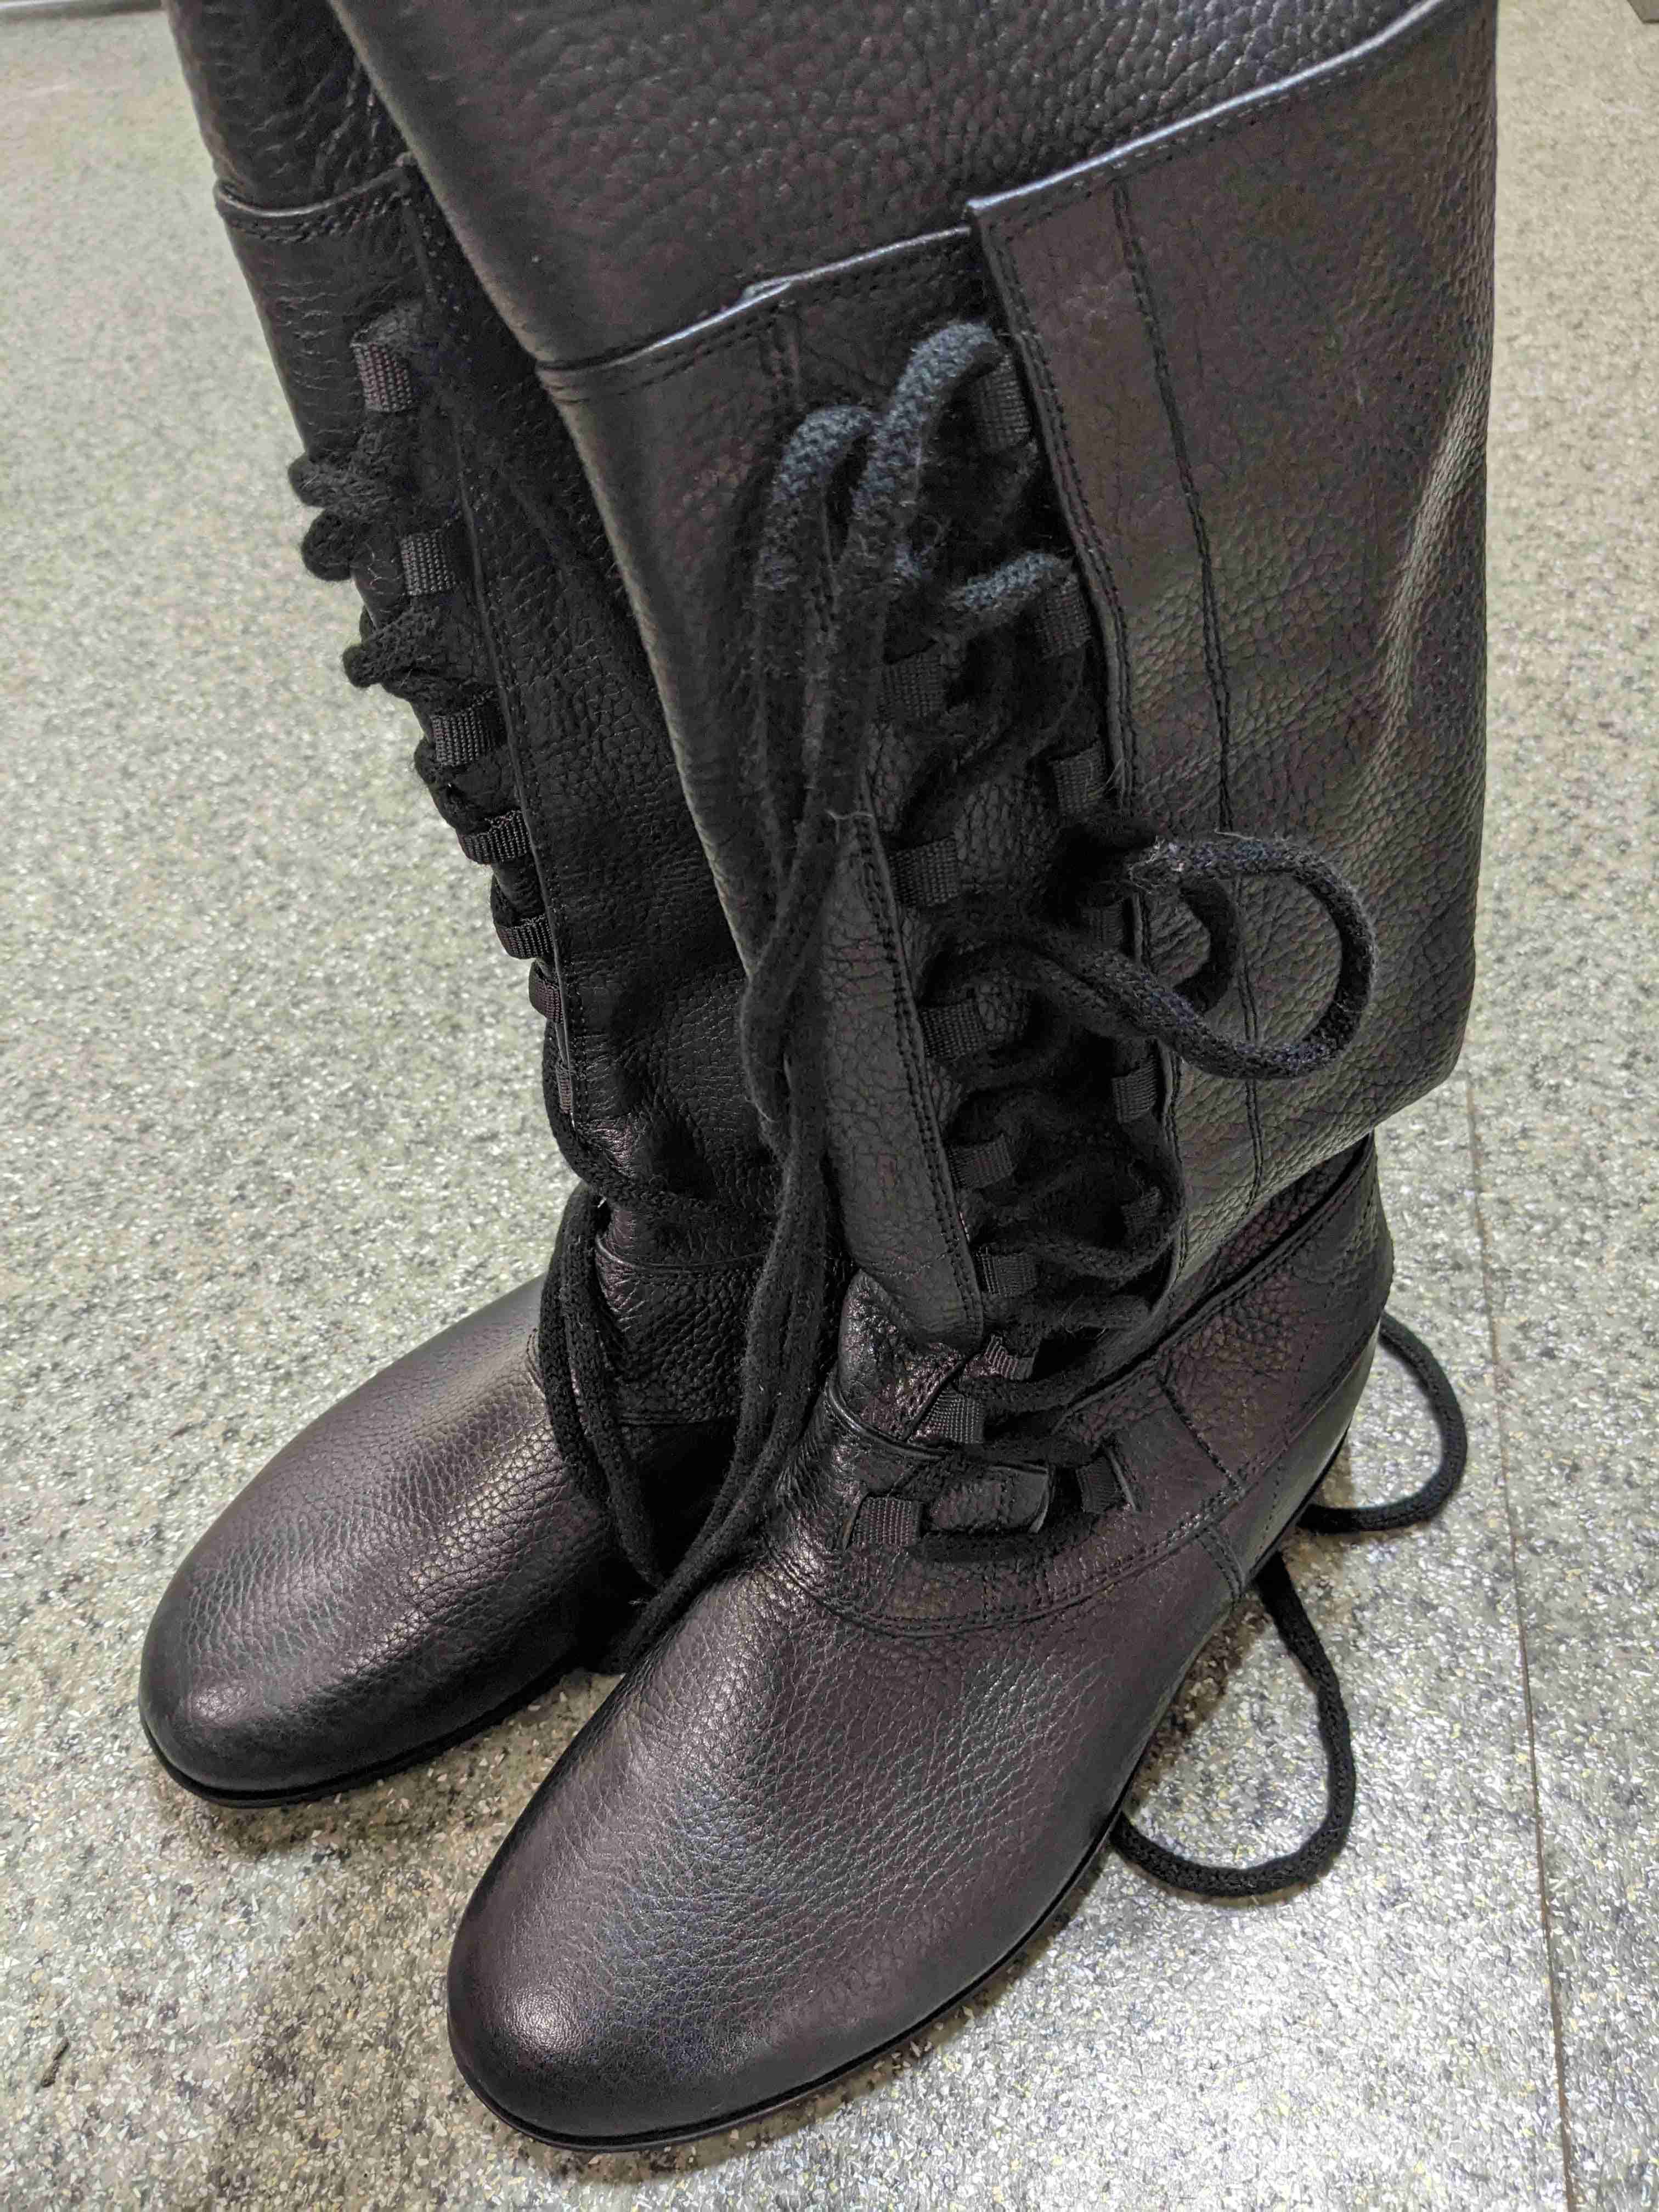 Sale Pirate Boots